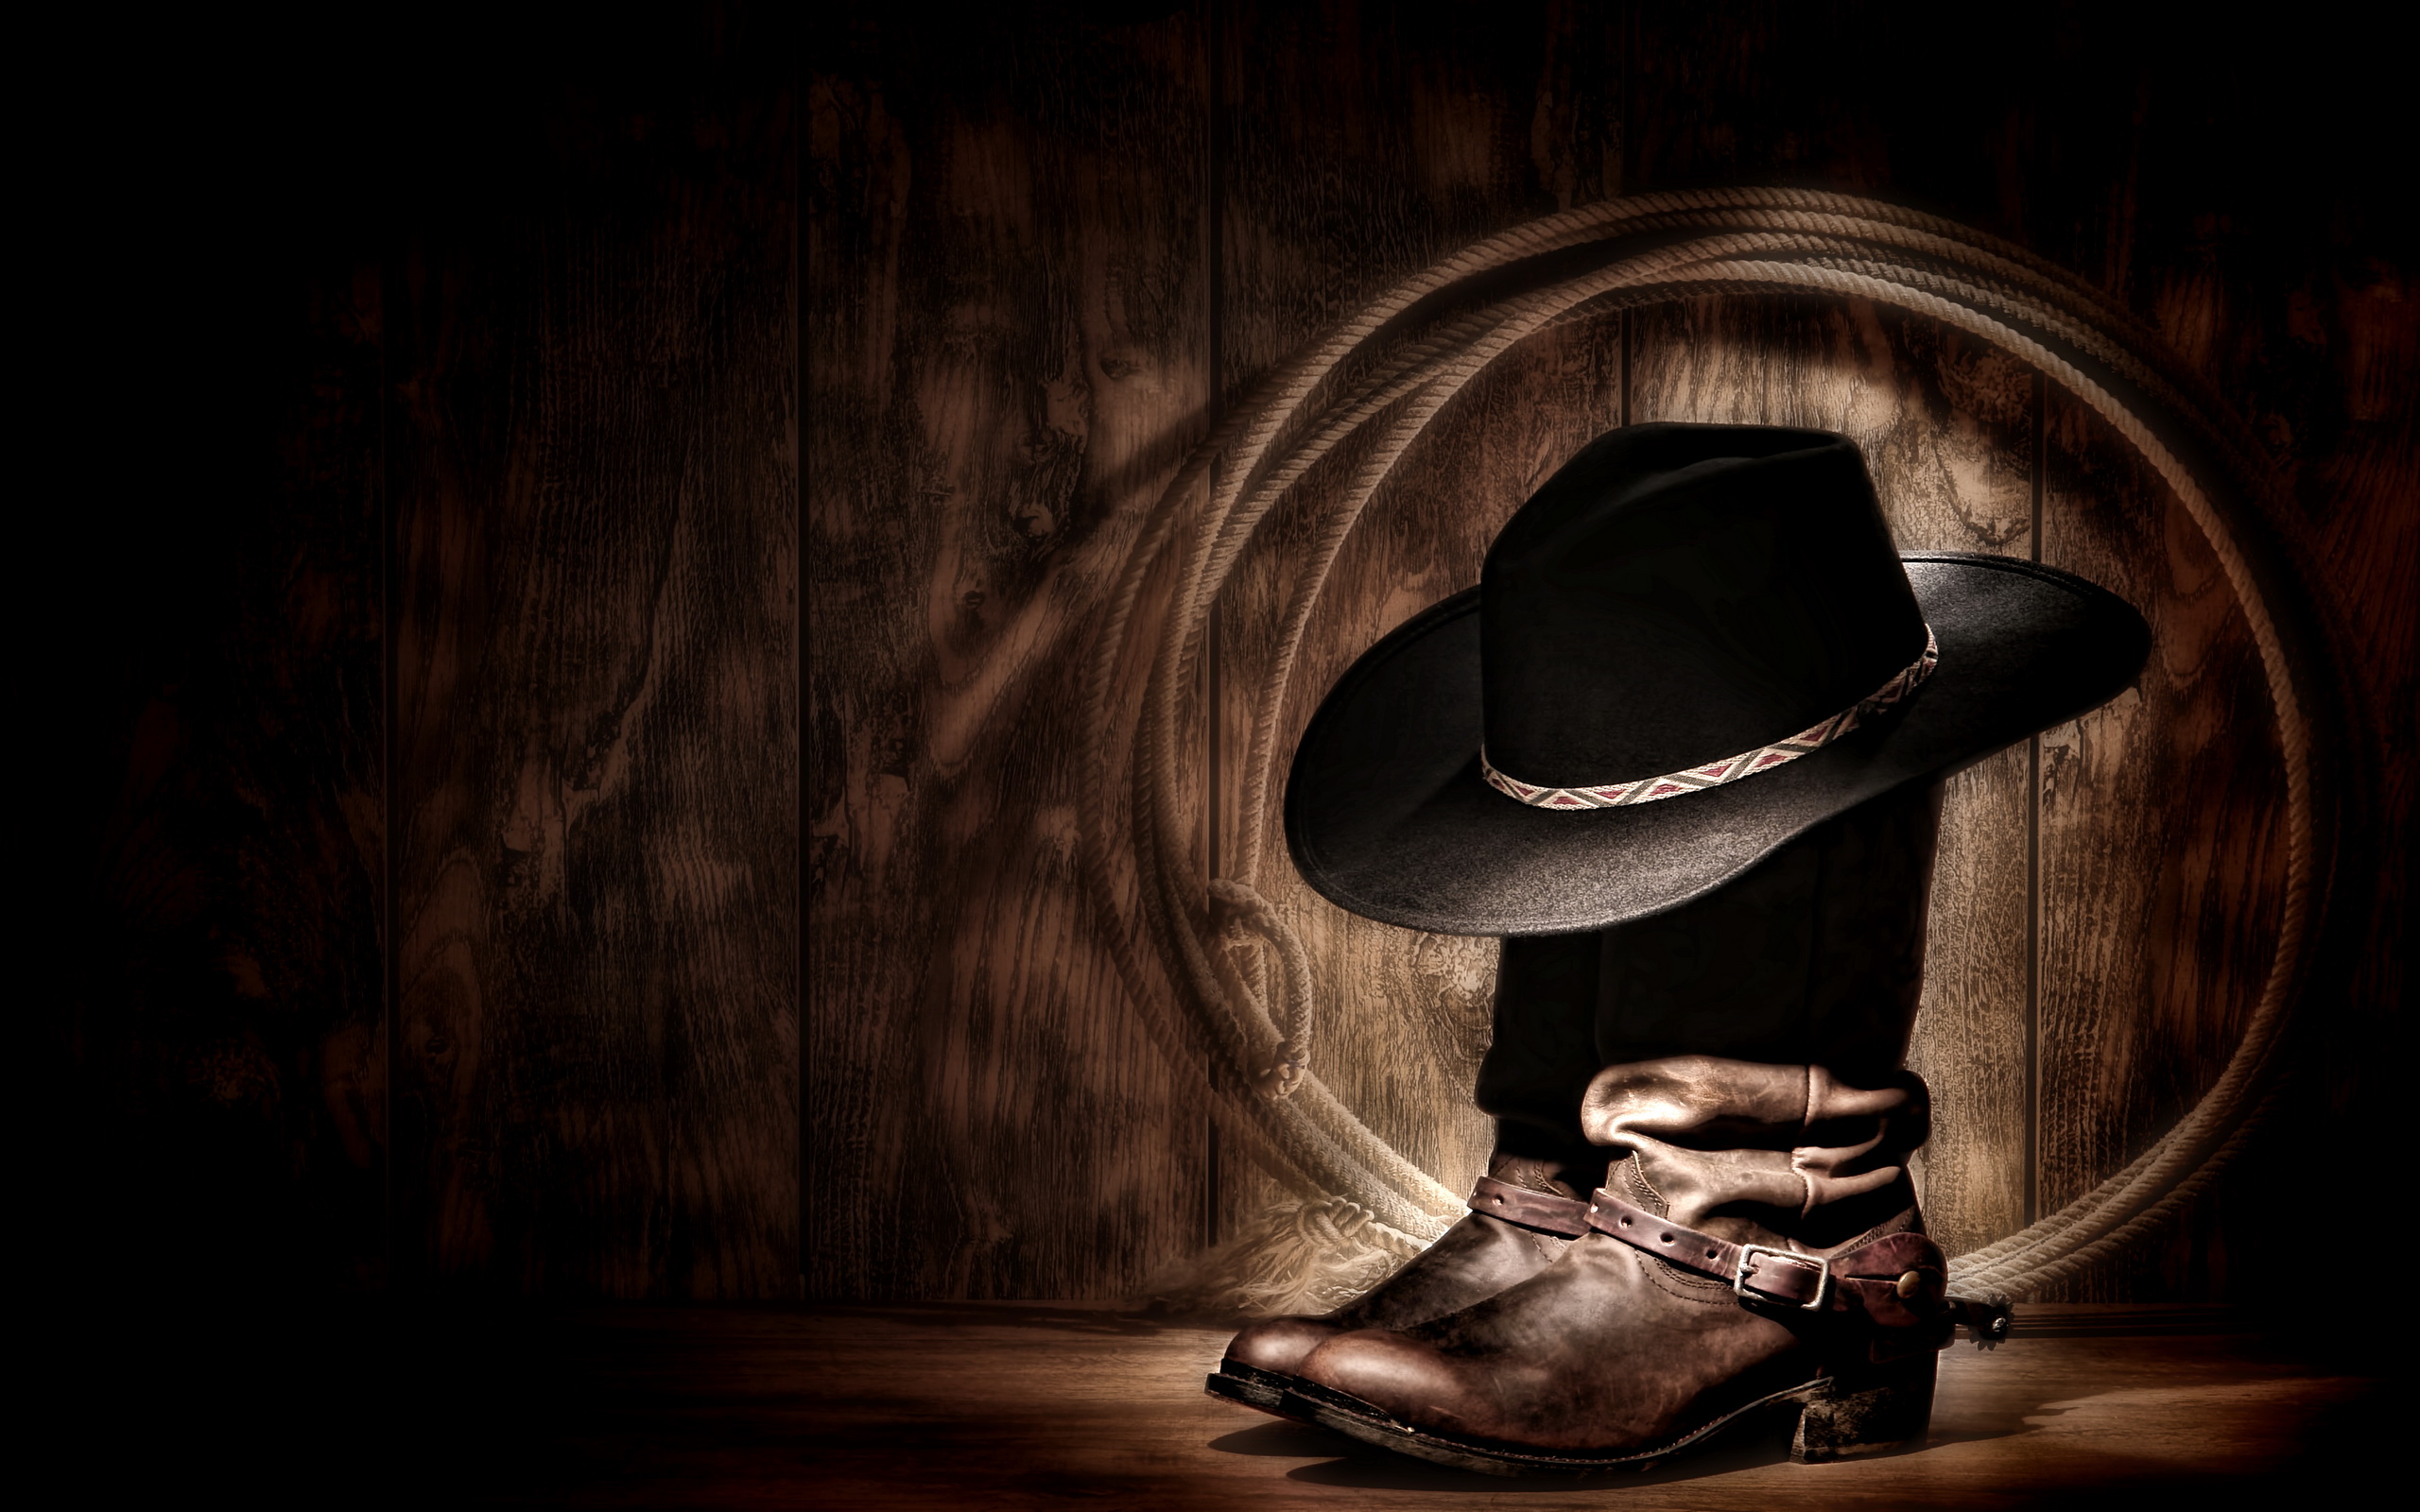 Free Cowboy Wallpapers High Quality 2560x1600